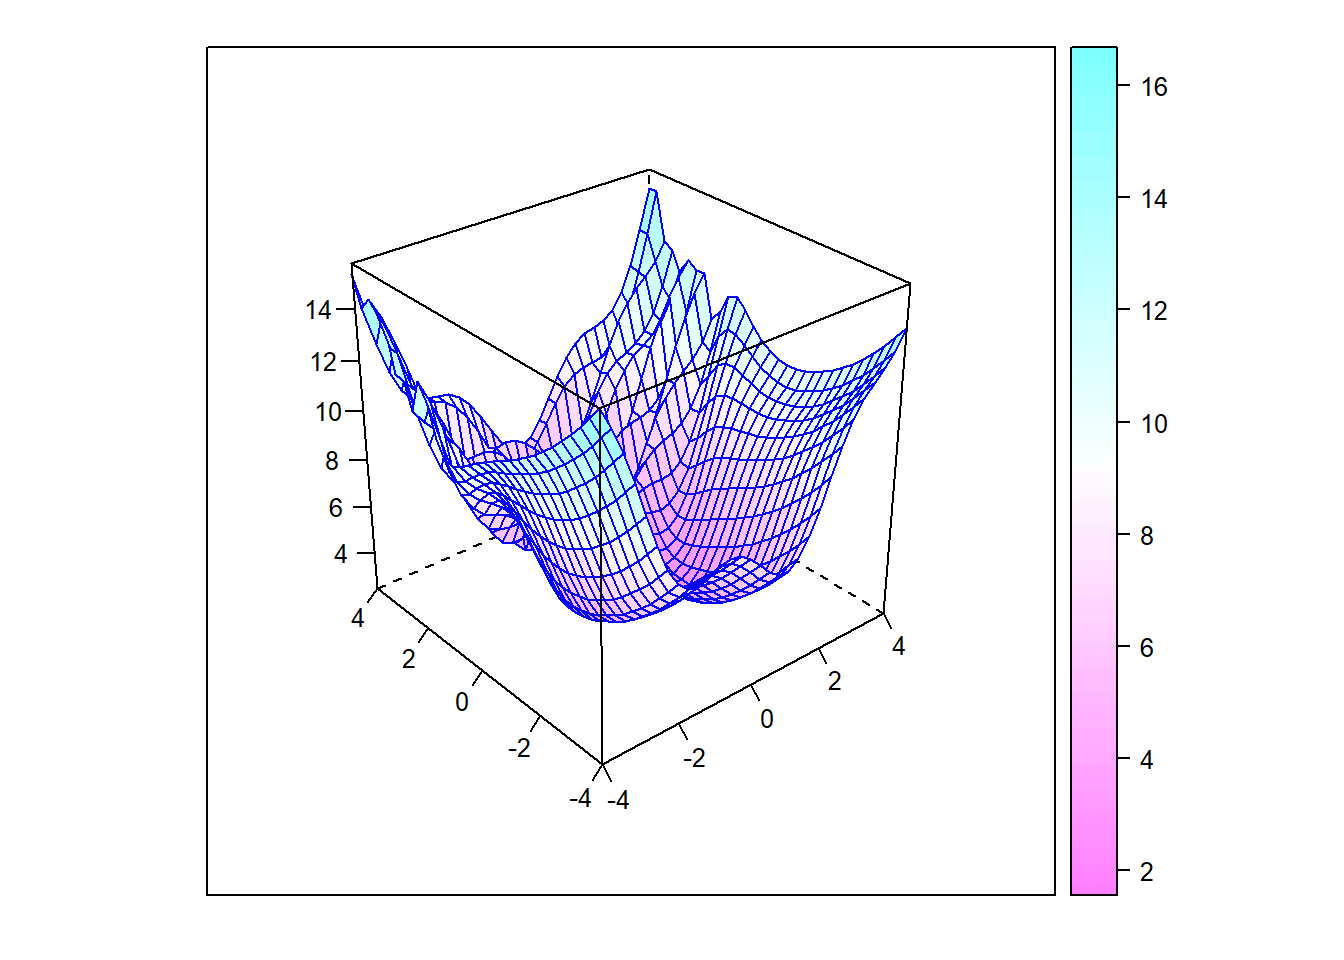 A surface plot with many minima plotted on a 3-dimensional square domain.